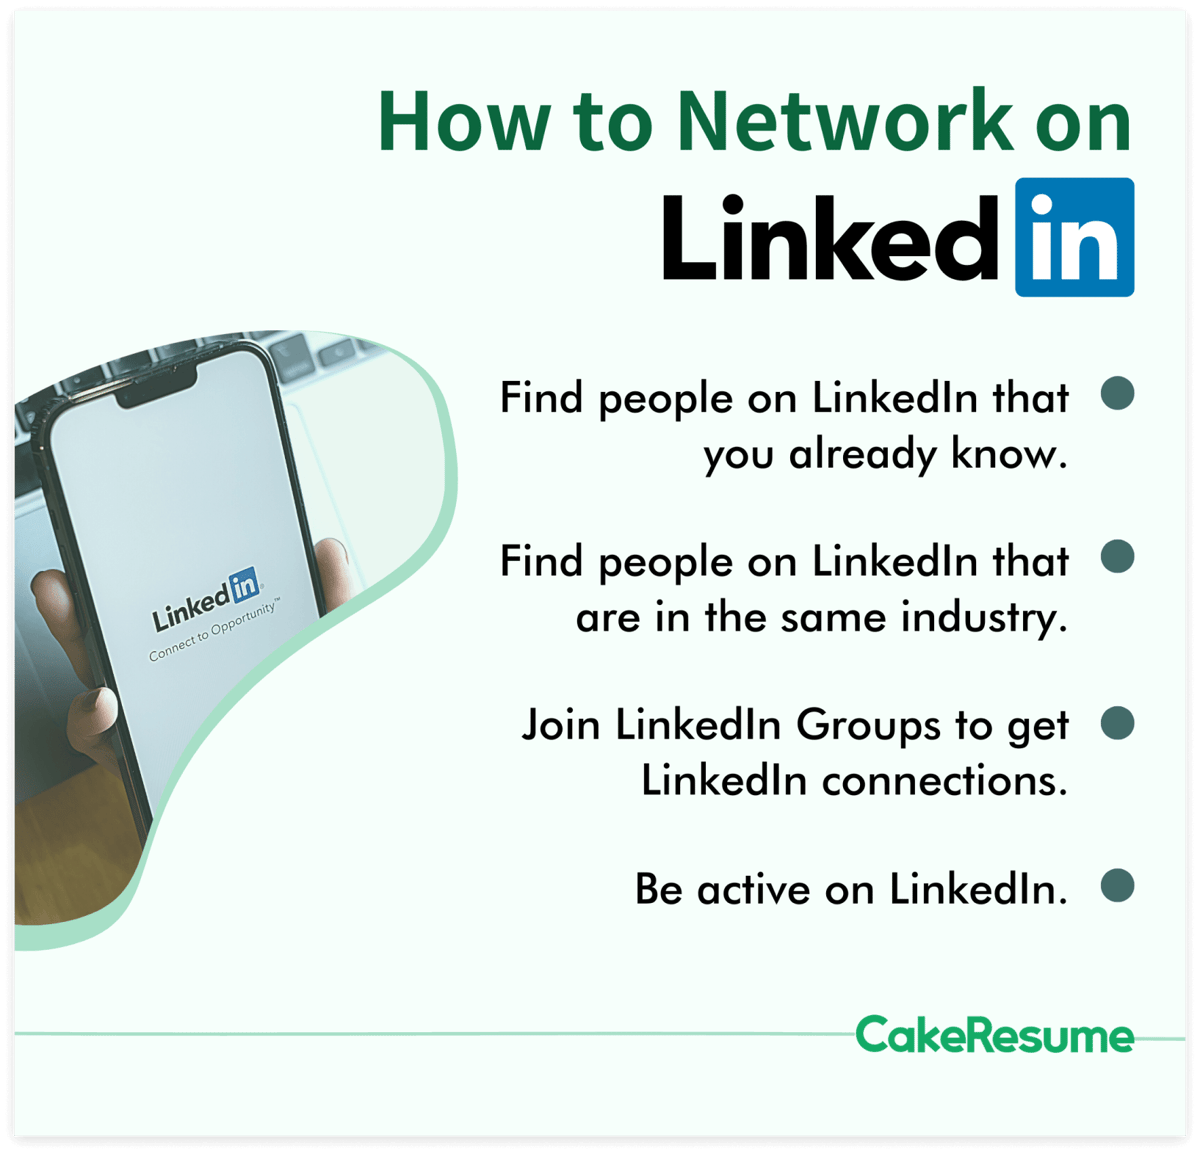 How To Network On LinkedIn